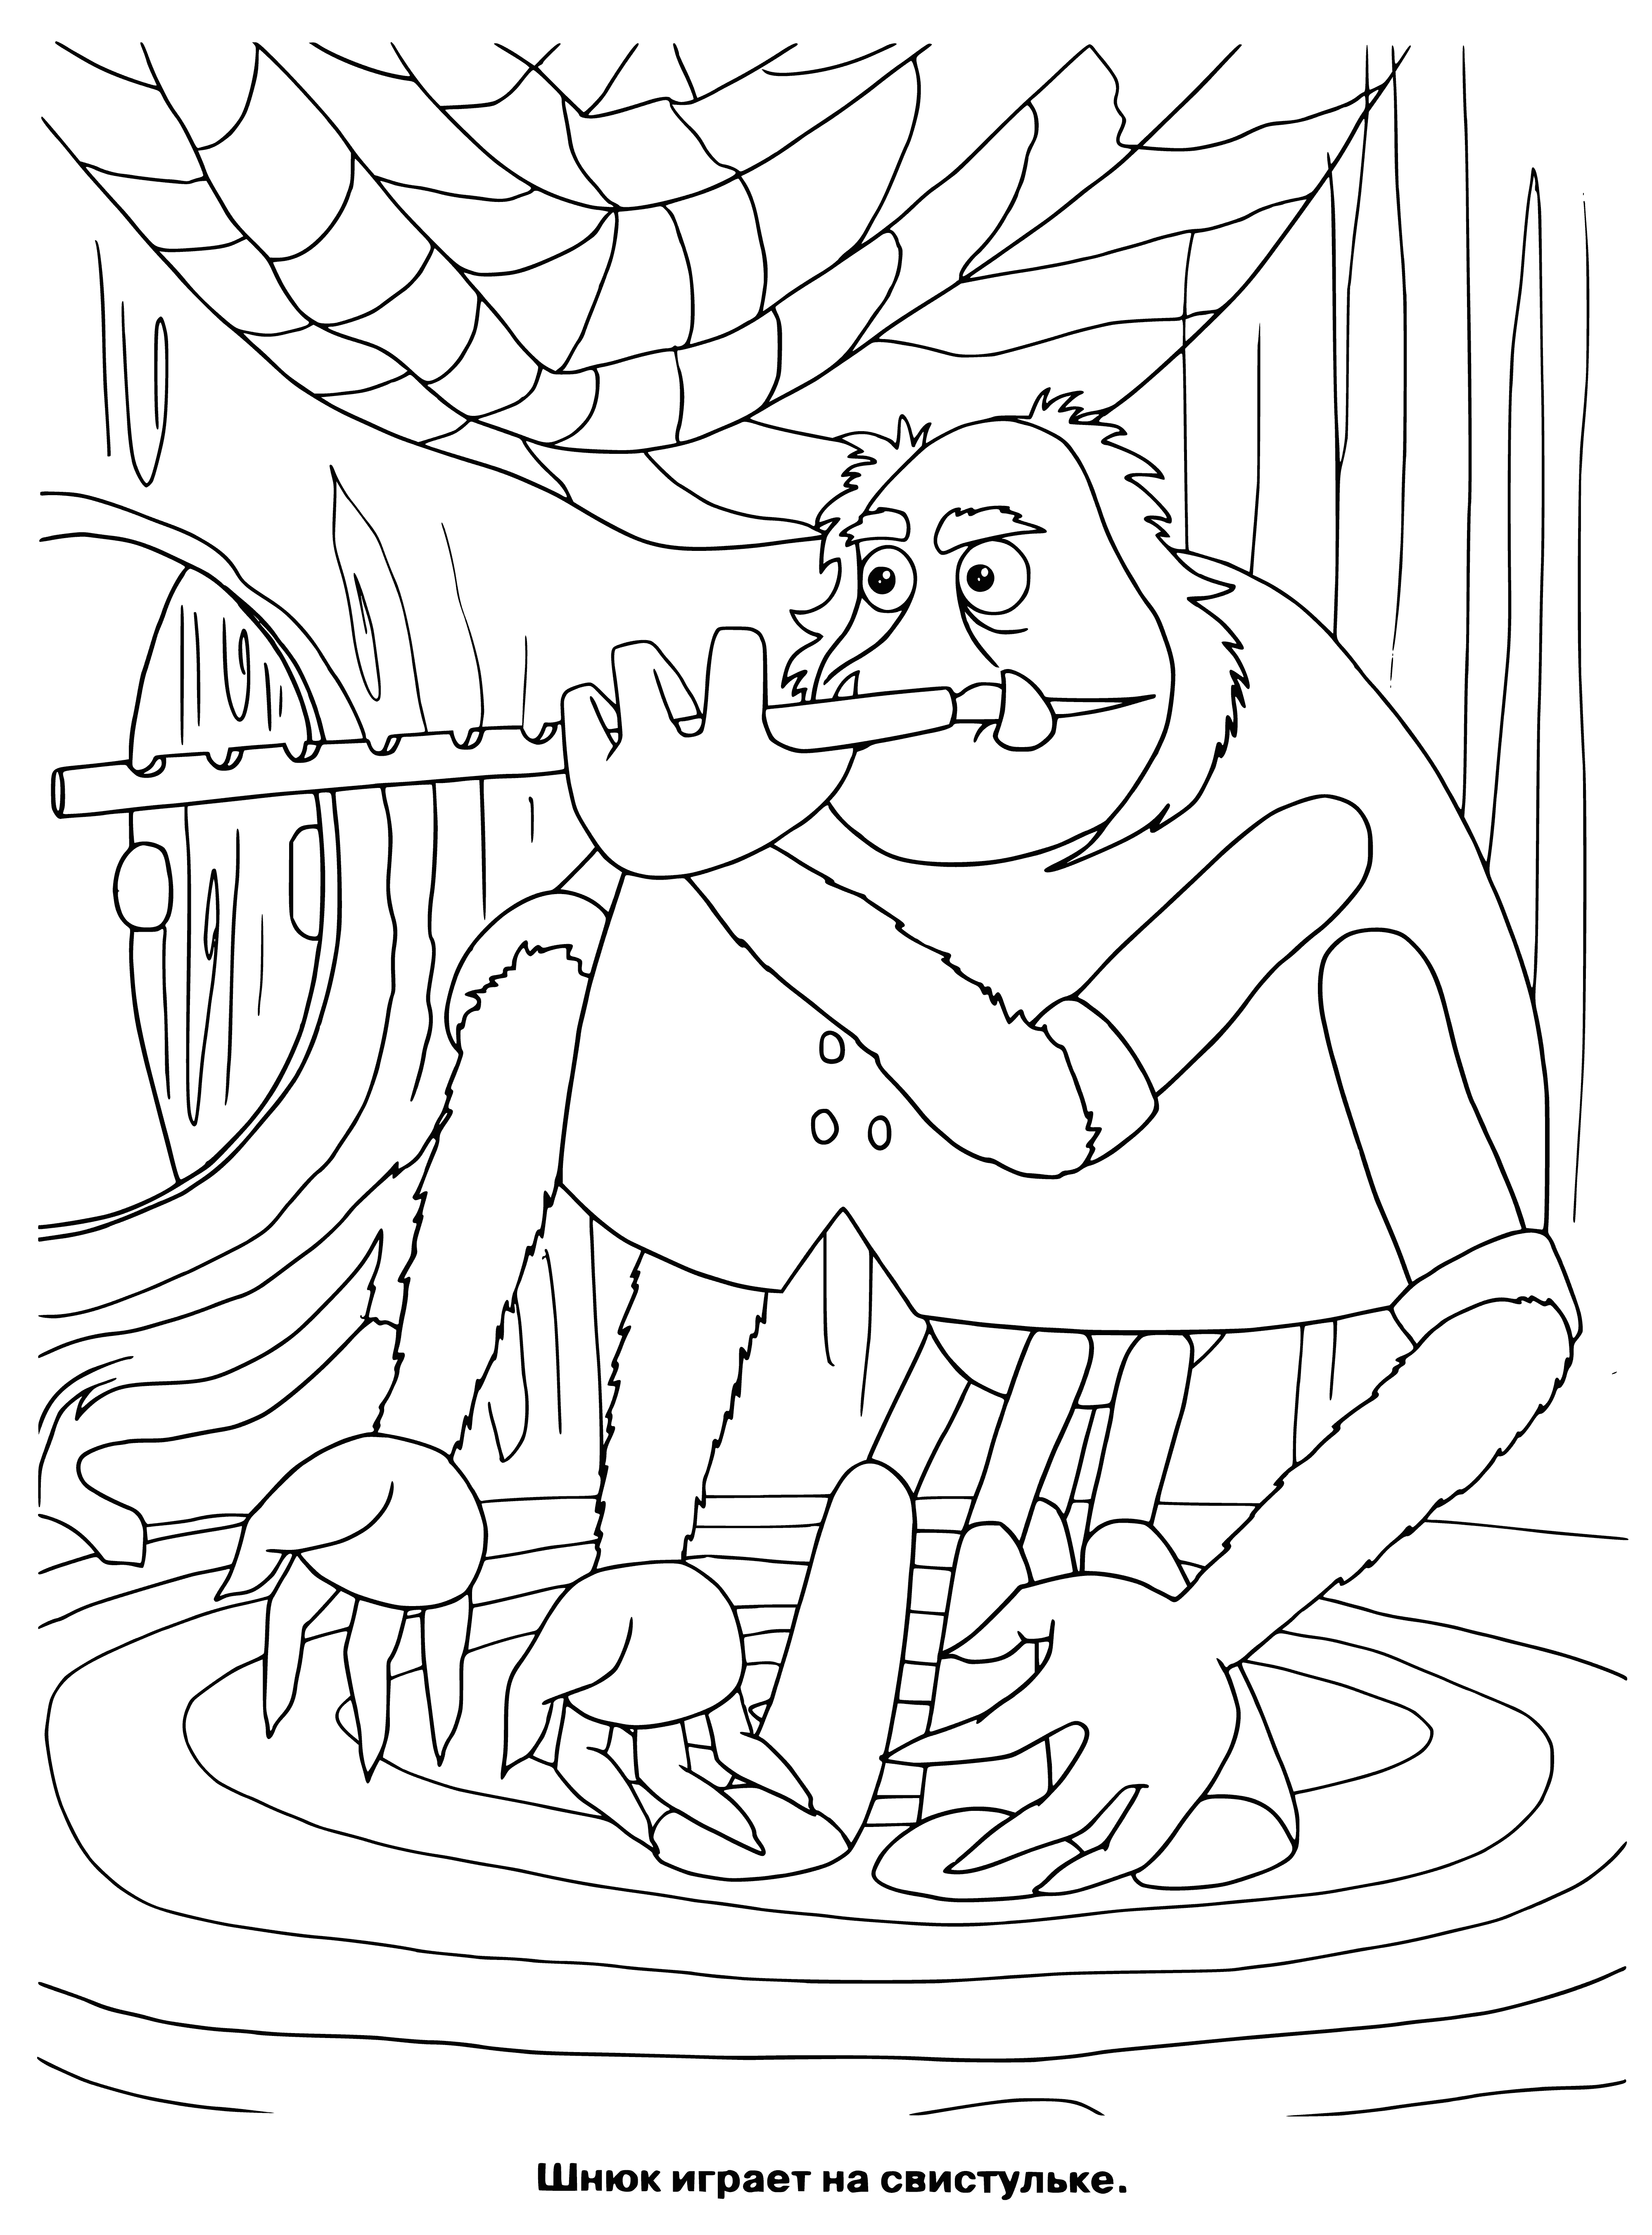 coloring page: Luntik and his best friend Shnyuk are small, singing, dancing creatures who love music and have four arms and two legs.